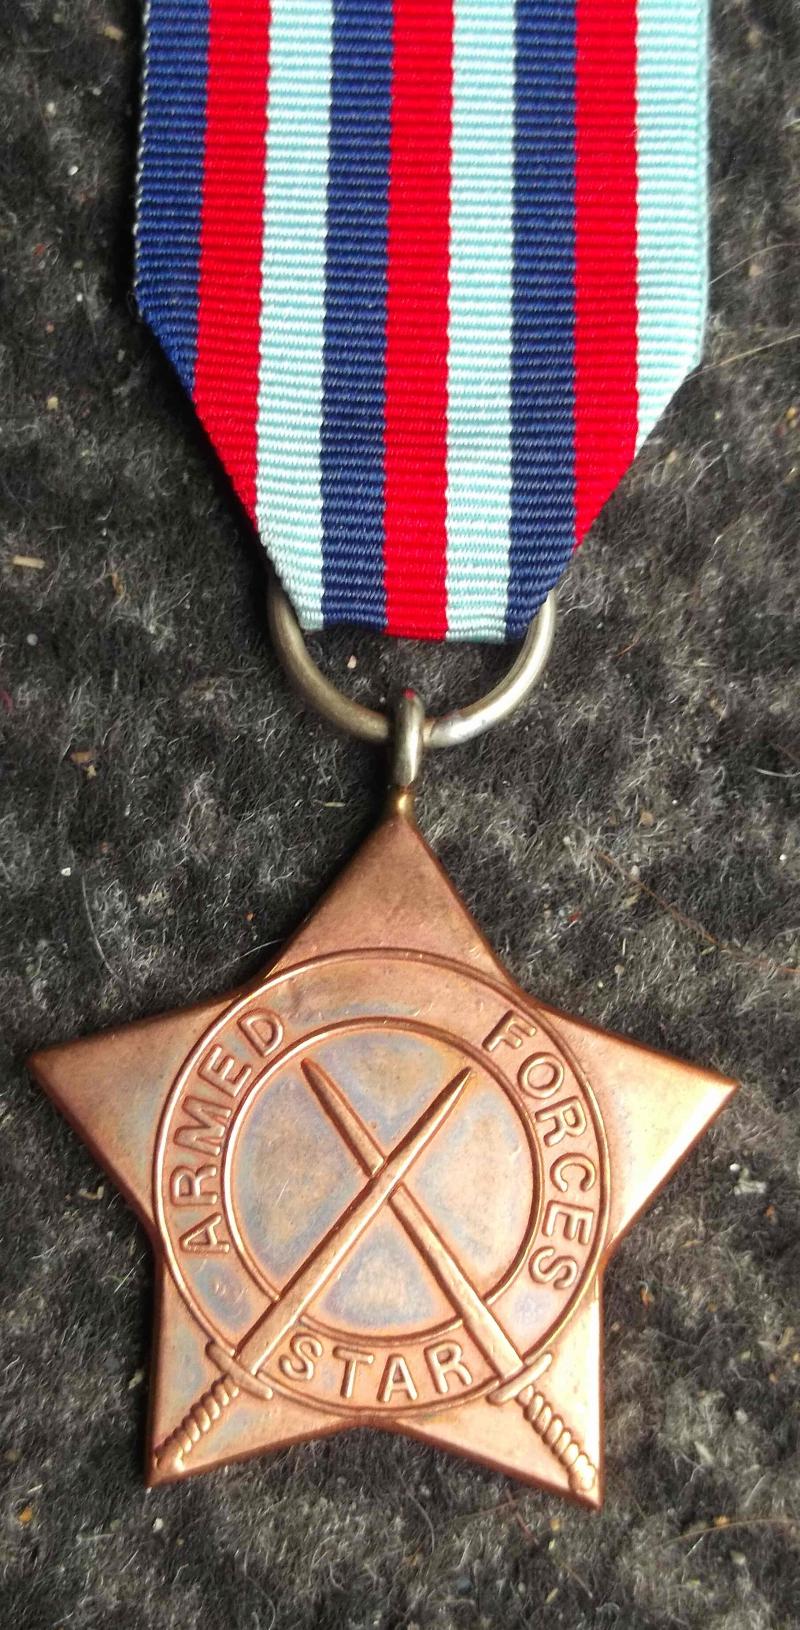 British and Commonwealth Armed Forces Star Medal